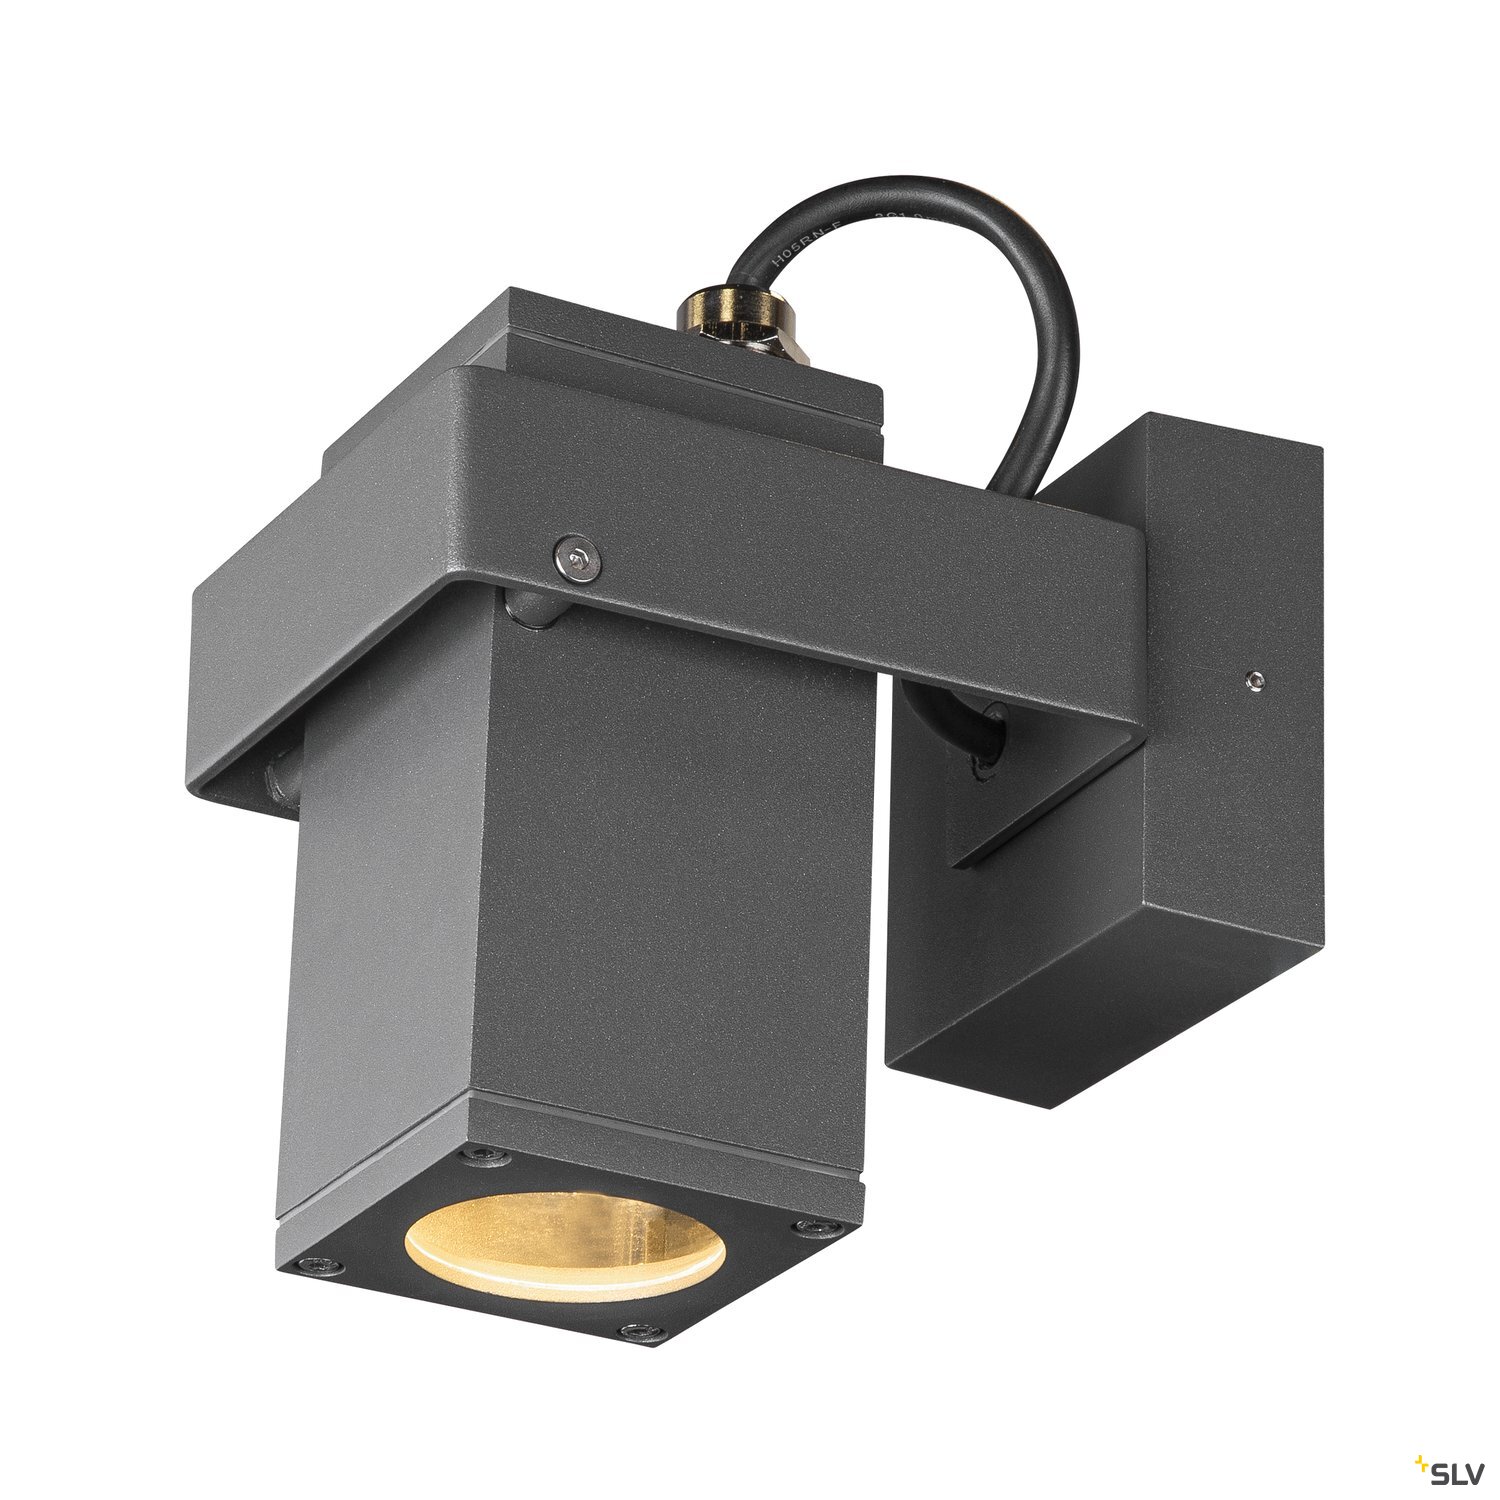 SLV Wall and Ceiling Light THEO BRACKET, GU10, anthracite, IP65